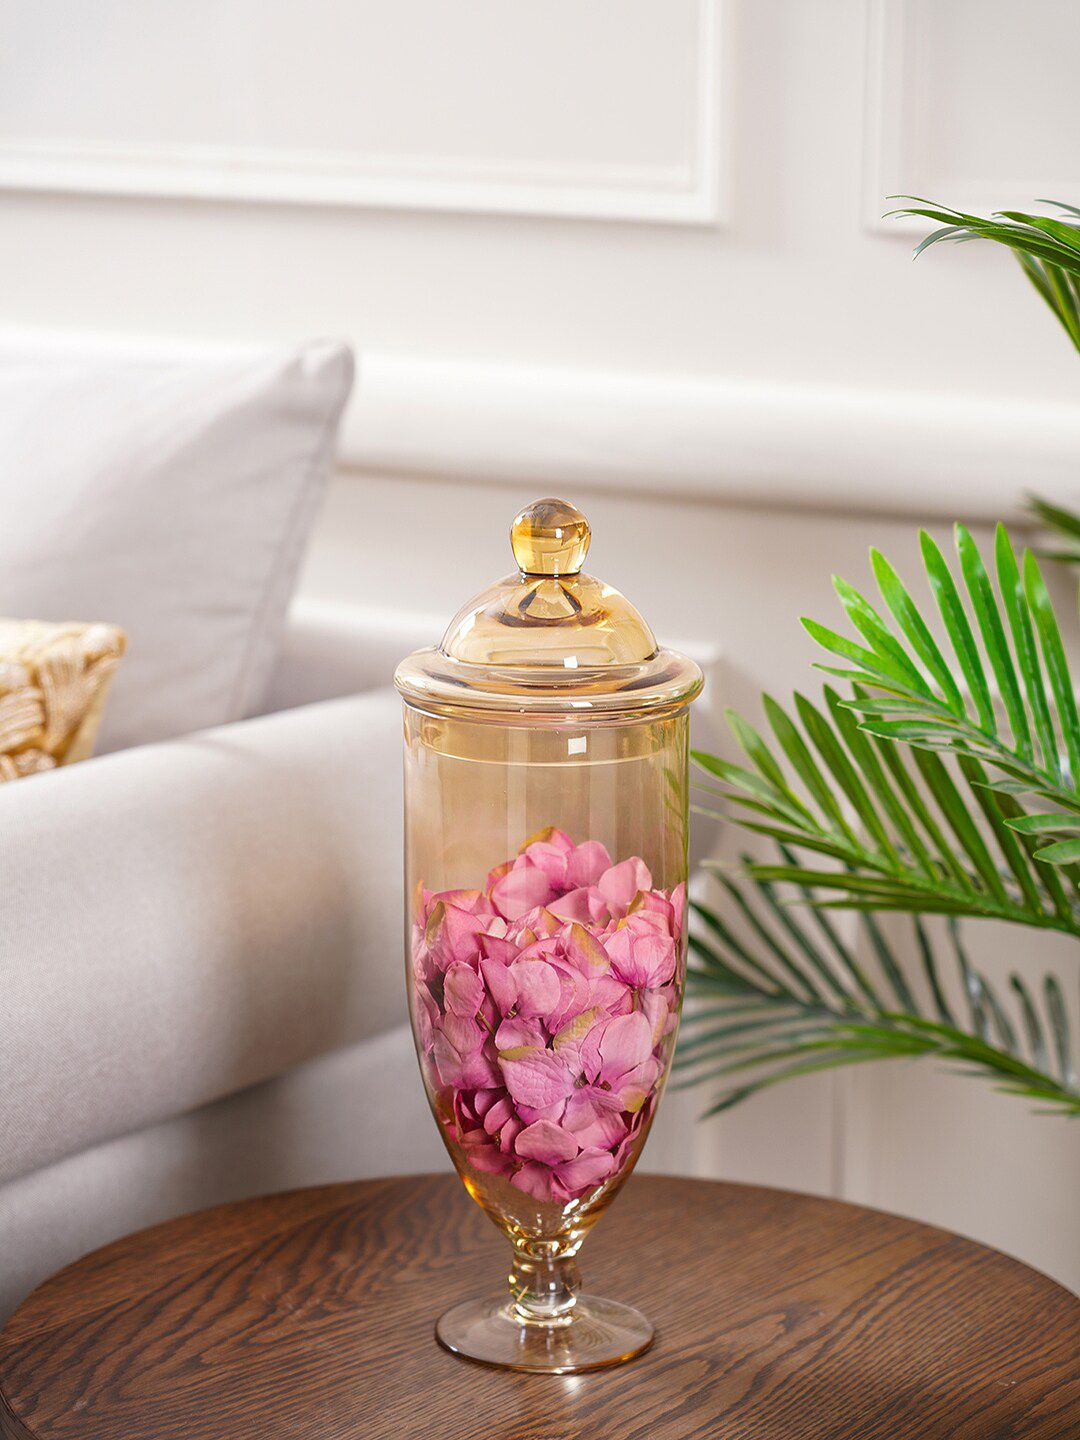 Pure Home and Living Gold-Toned Solid Glass Candy Jar Price in India